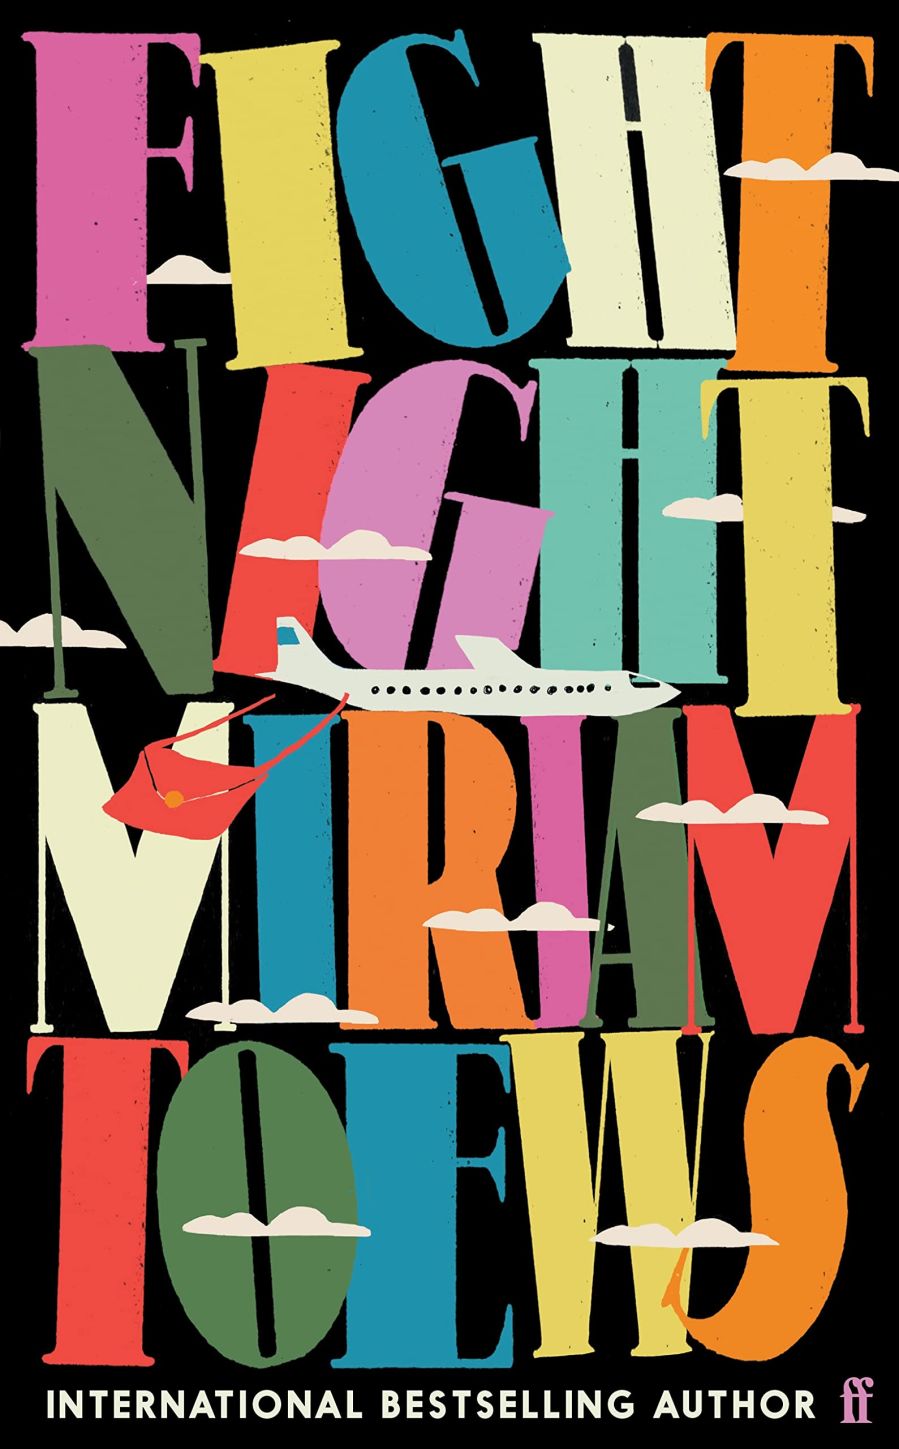 Cover of the novel Fight Night by Miriam Toews.